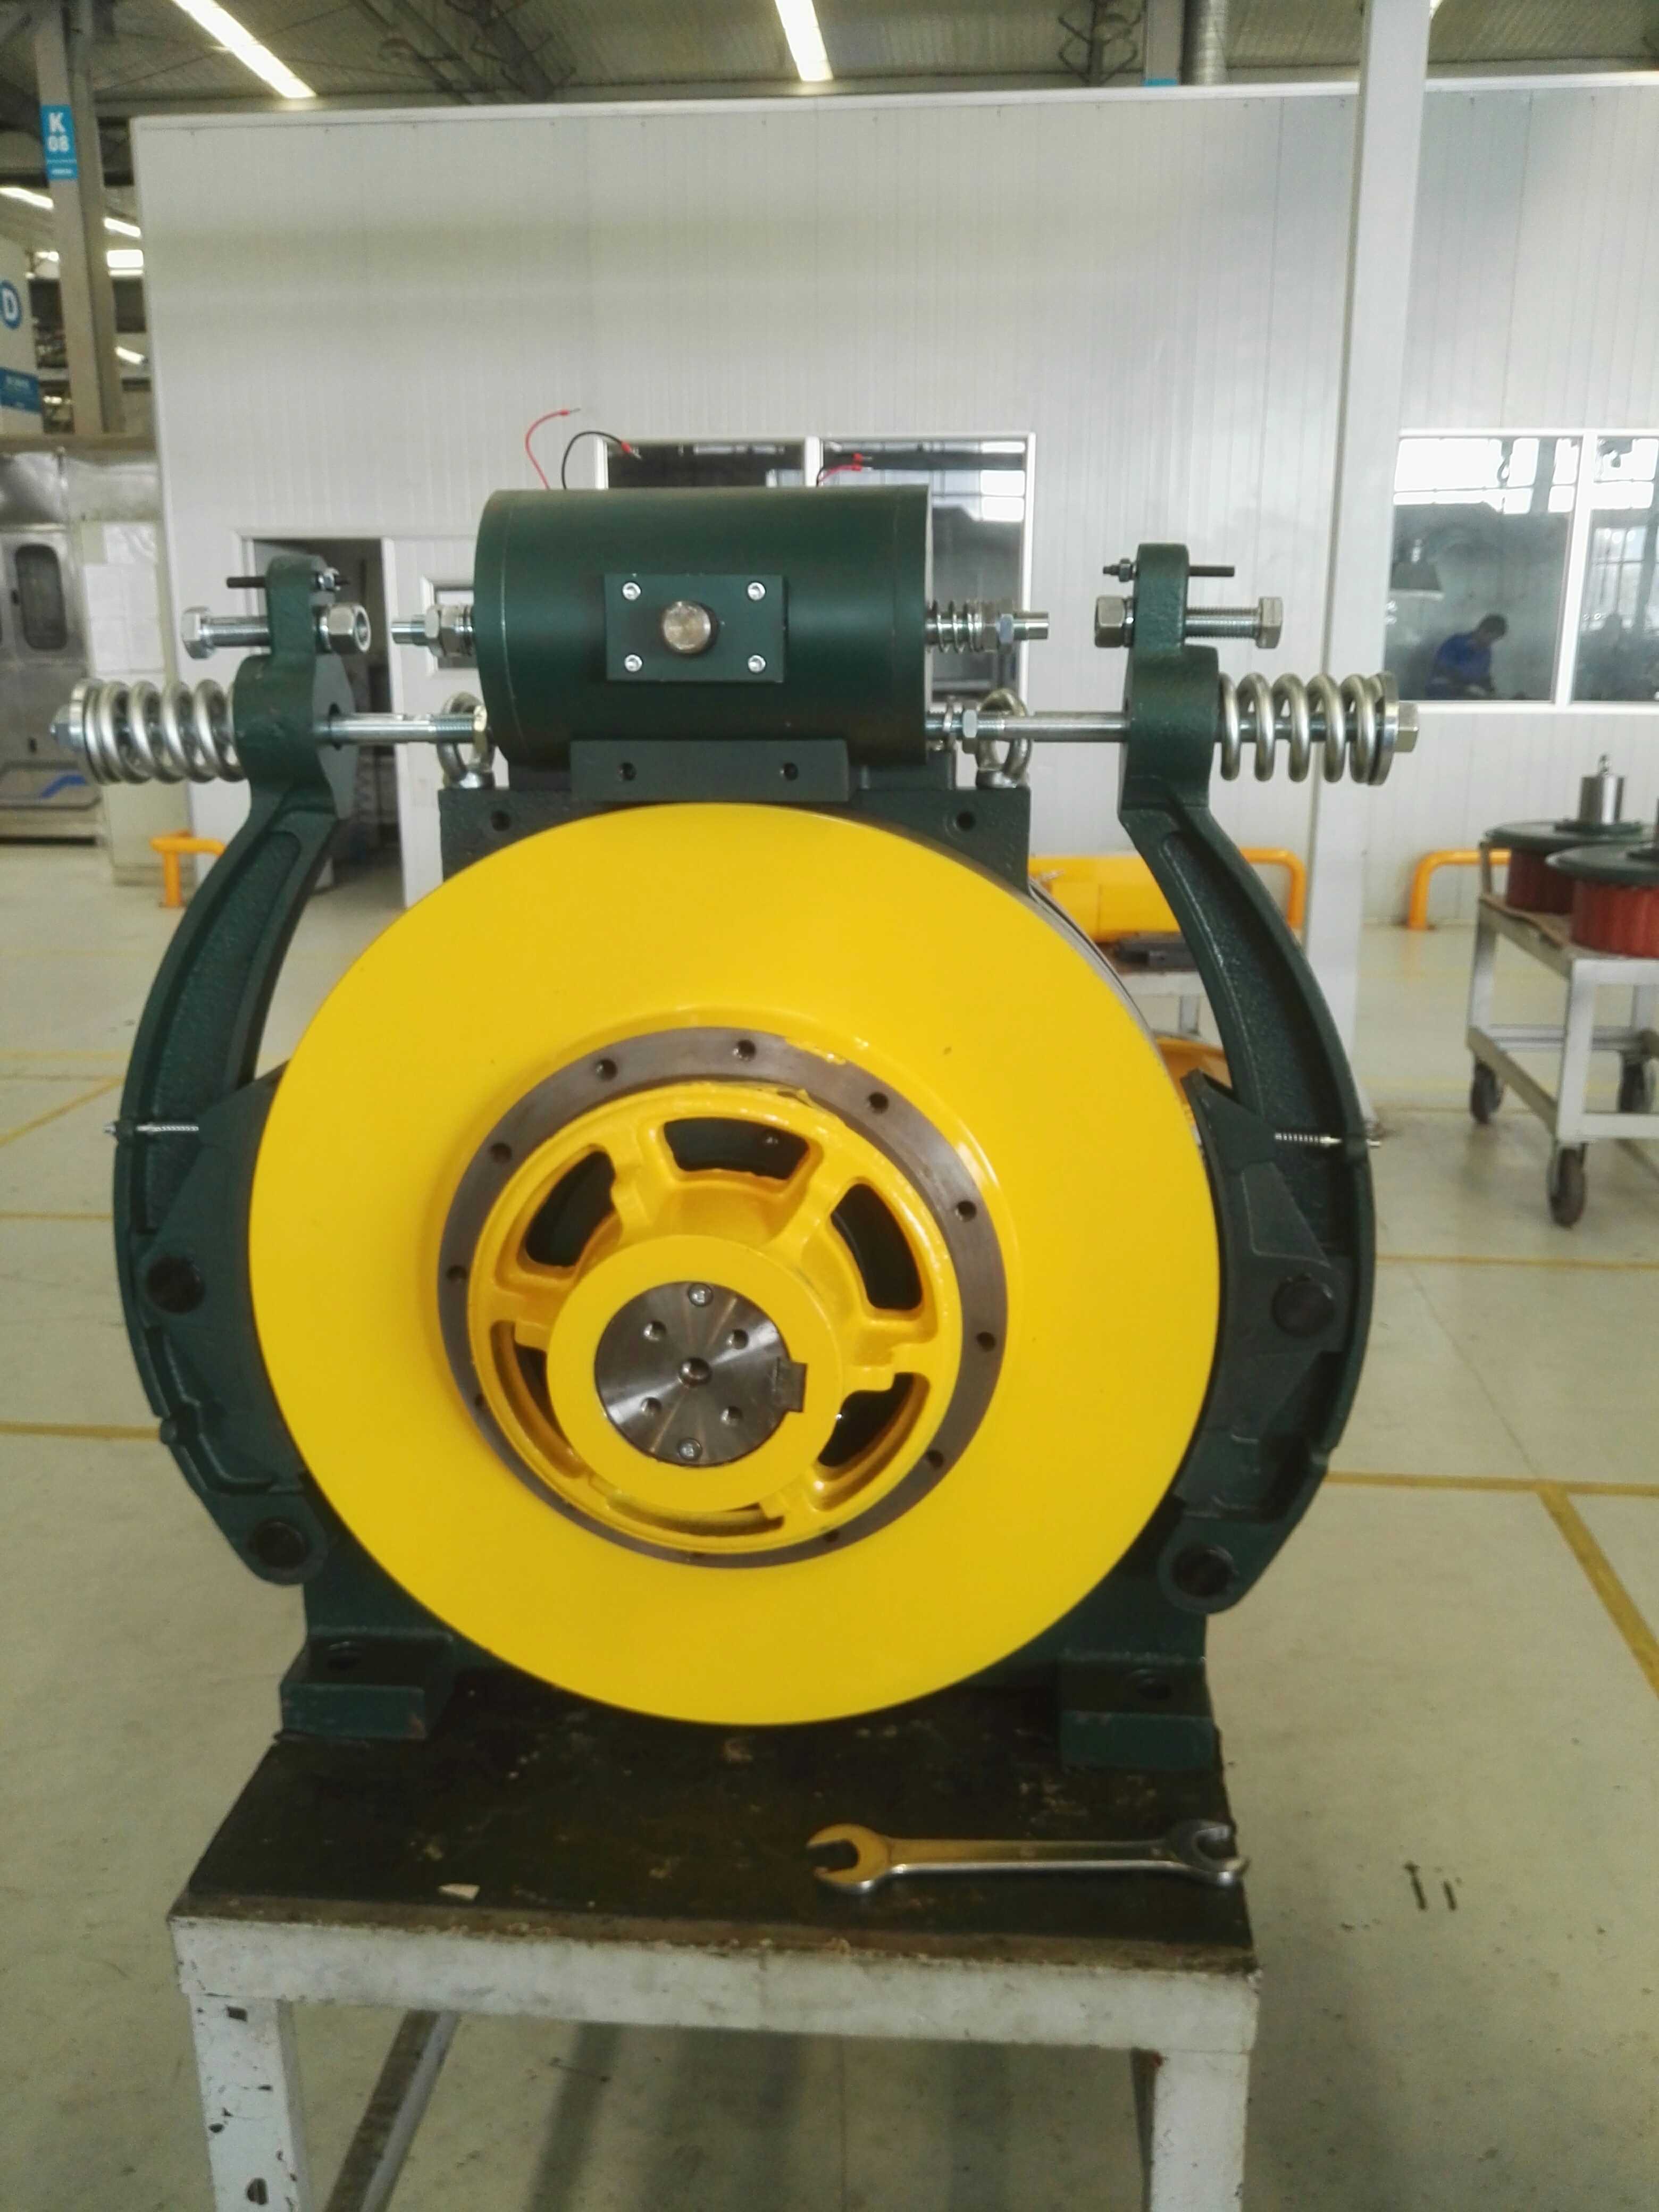 Ningbo Shenling WYJ103-02 2:1 drum brake permanent magnet toothless traction machine 800- 1000KG